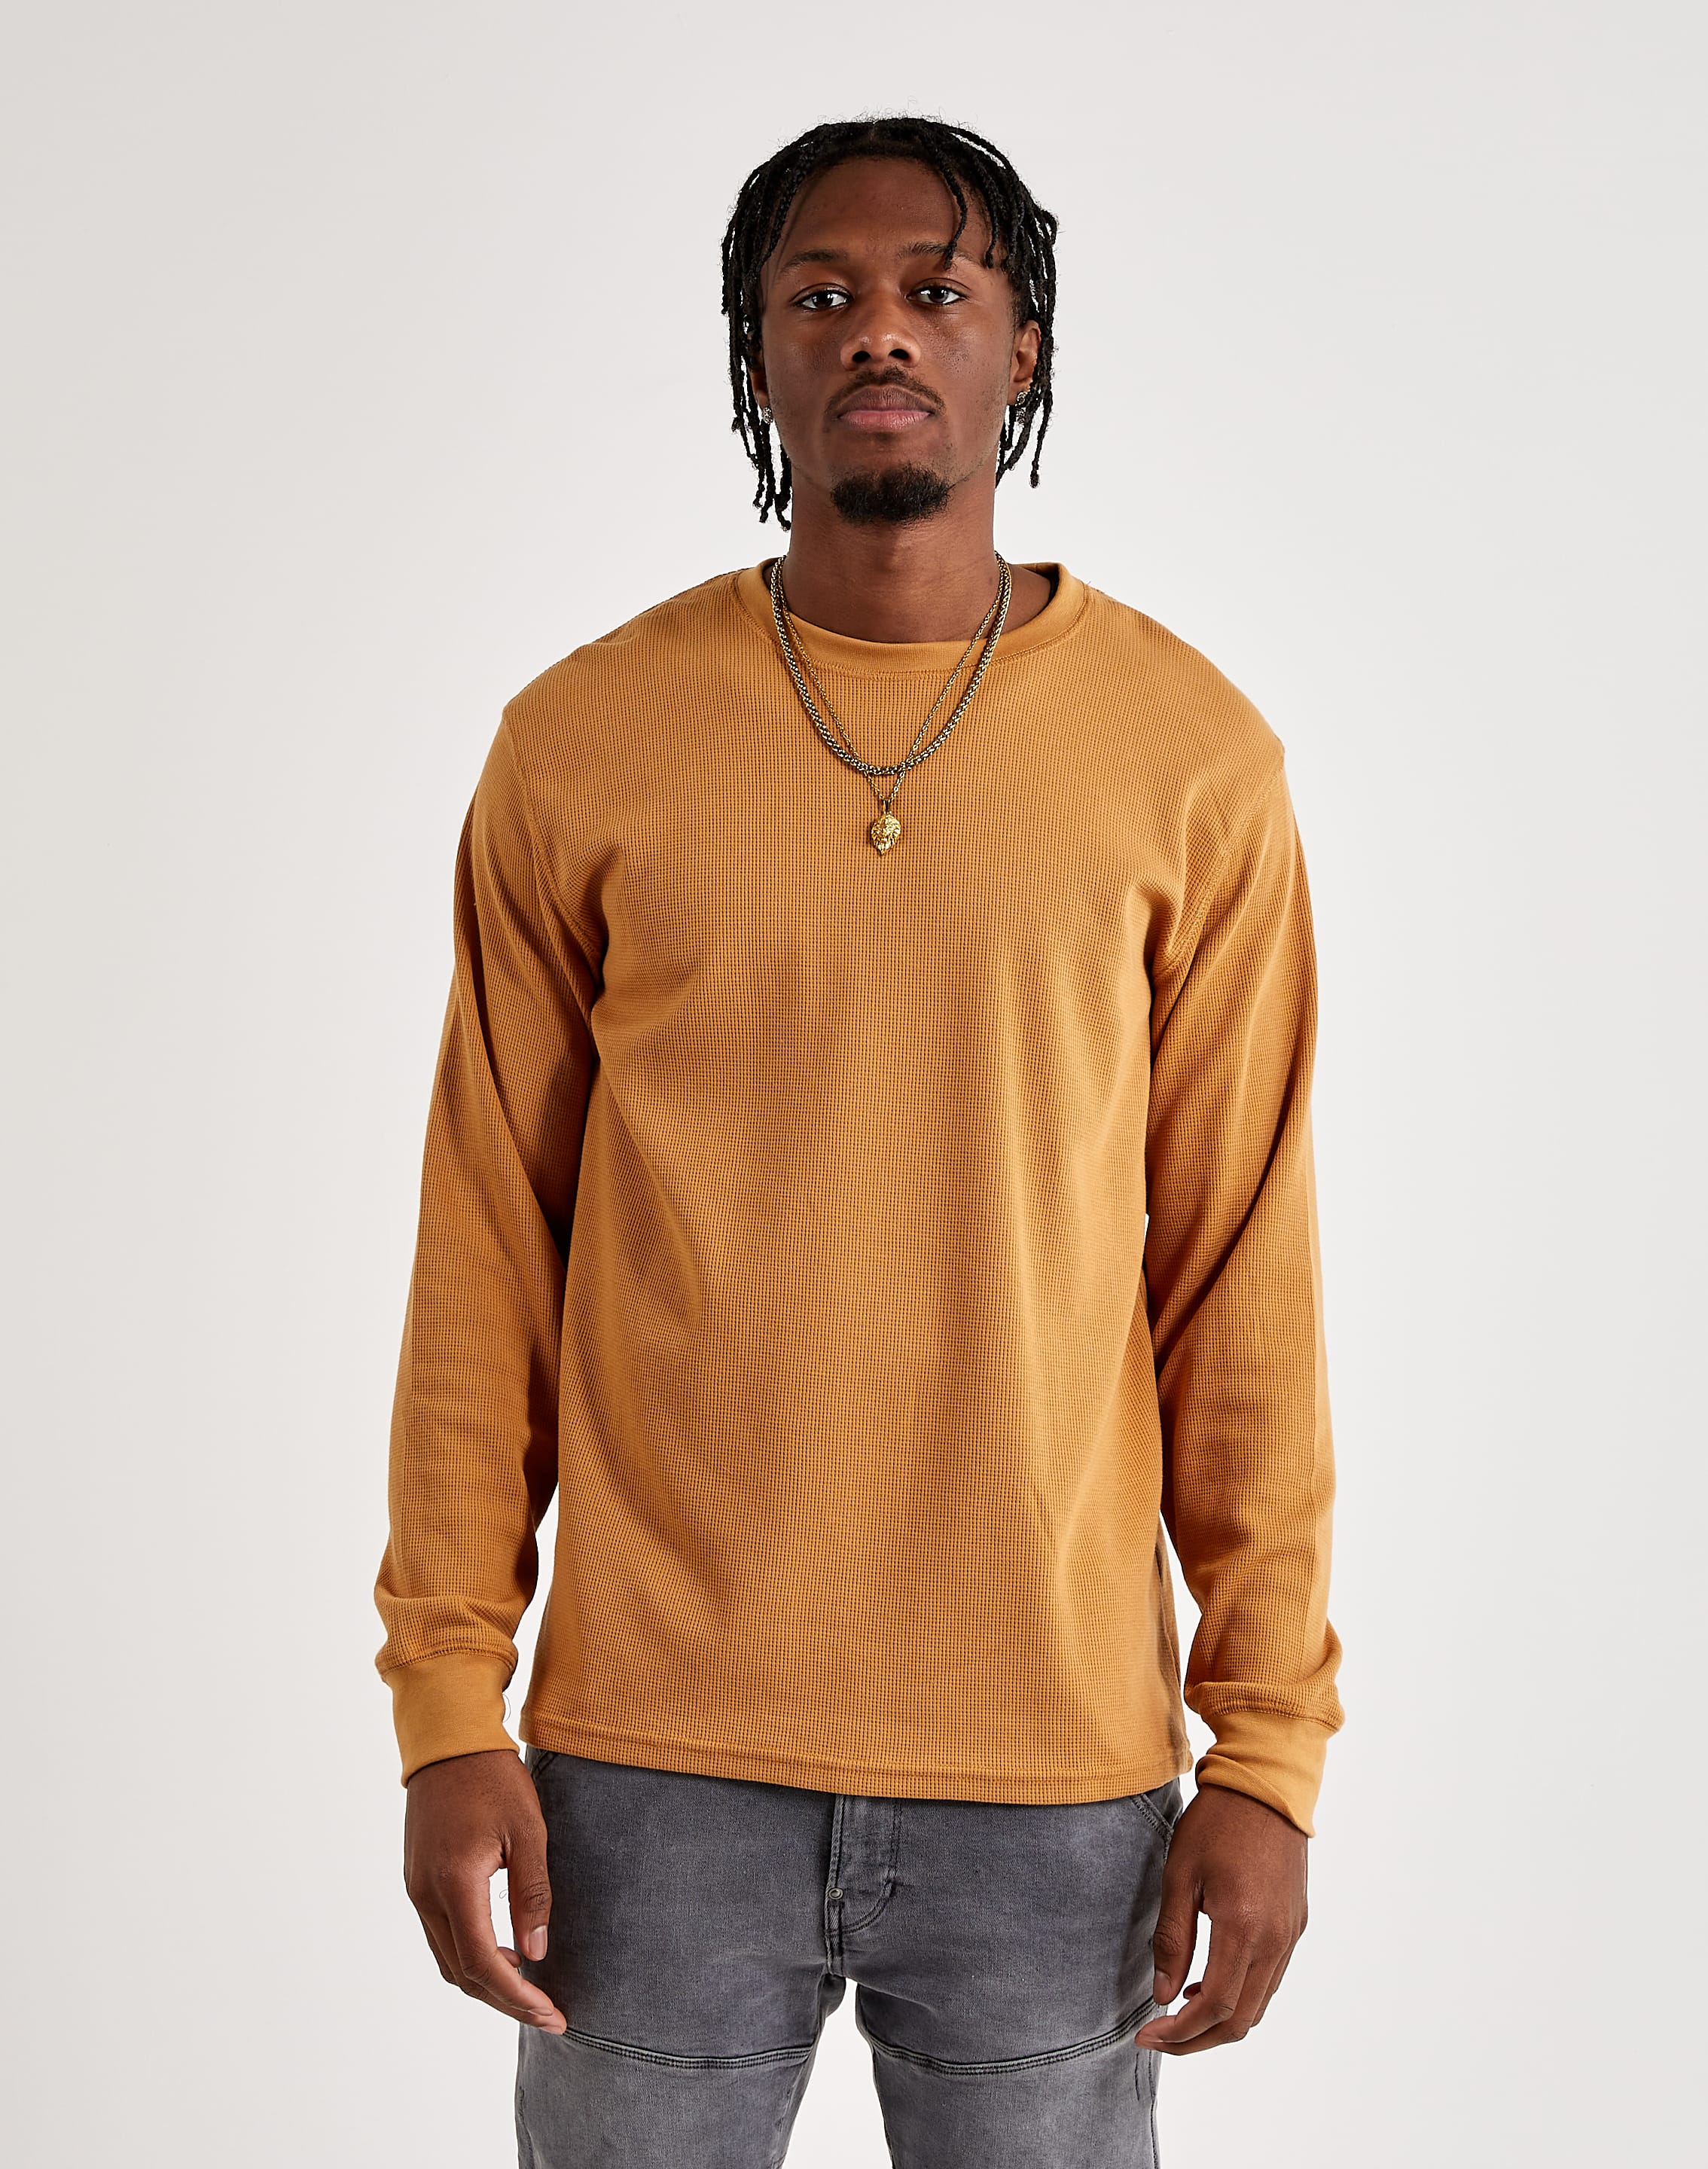 City Lab Classic Thermal DTLR – Shirt